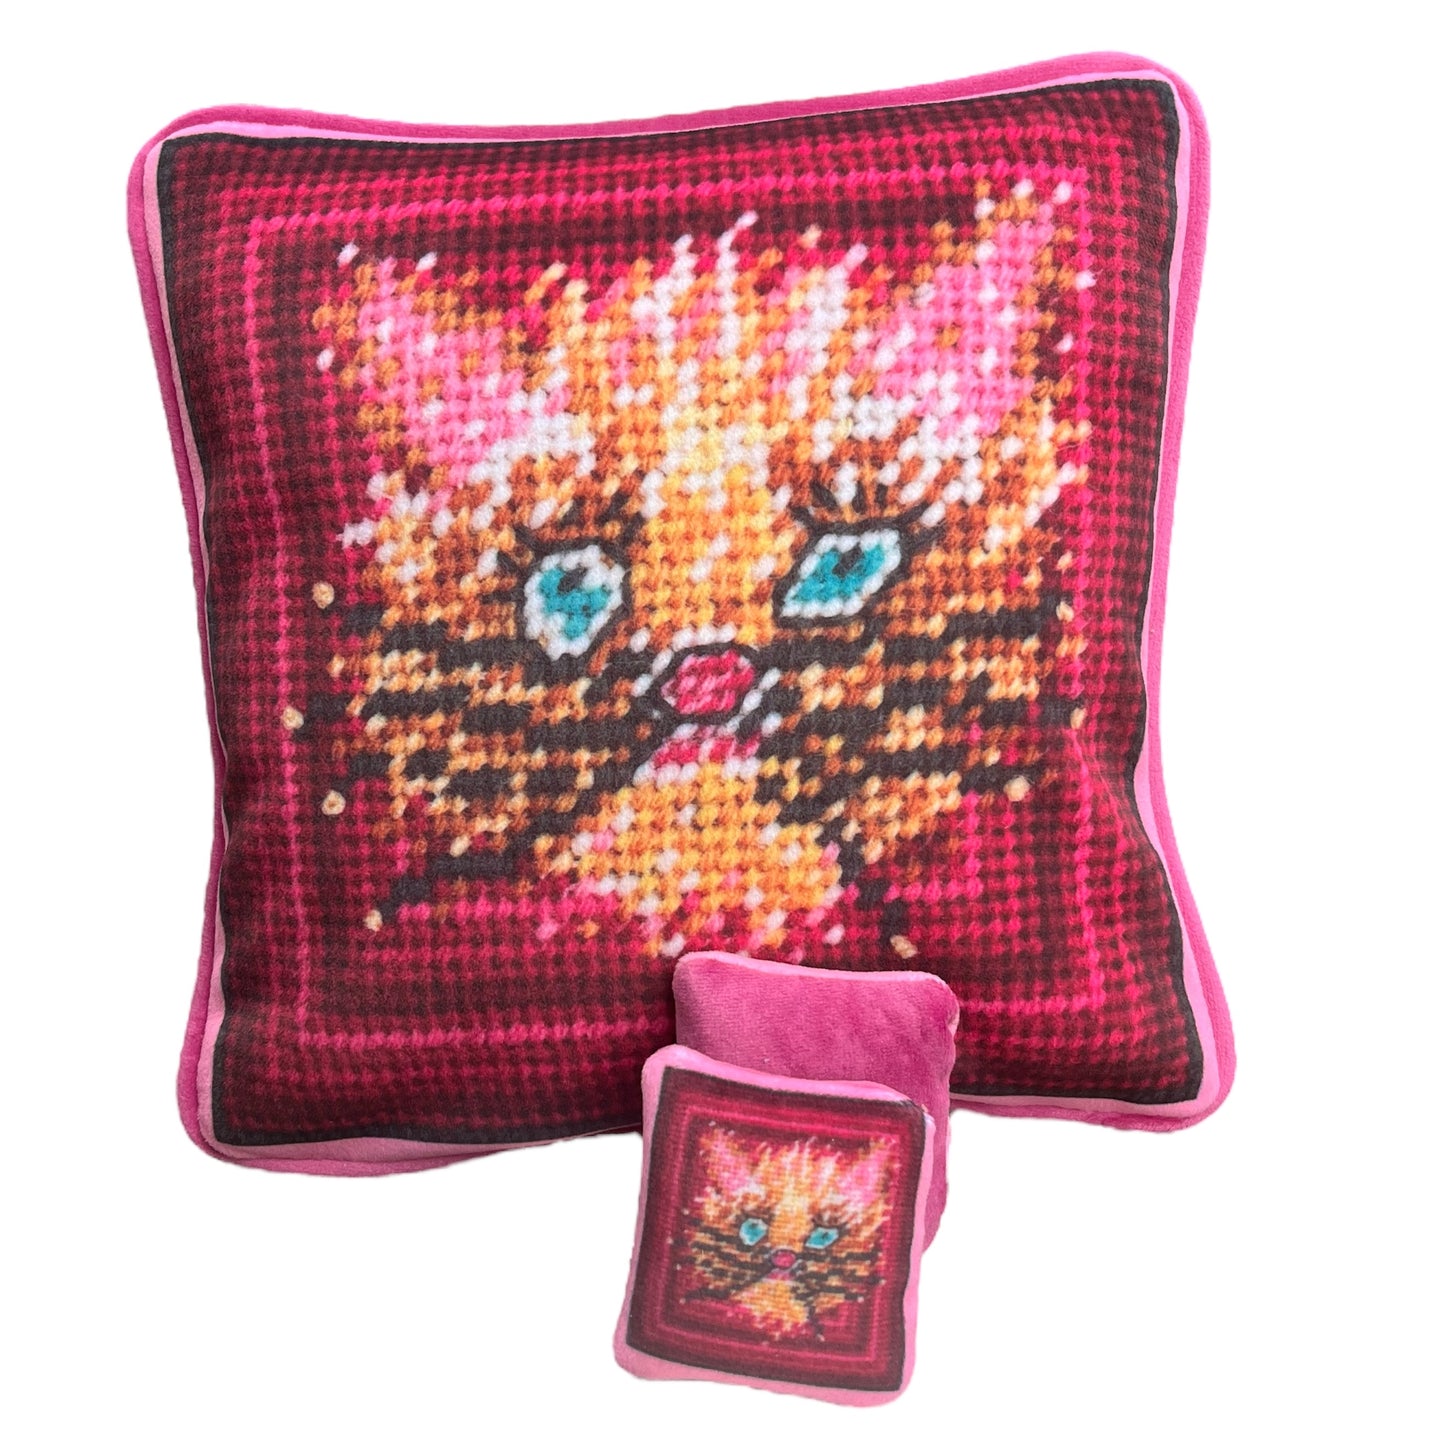 organic French lavender sachet and pillow of wild blue eyed cat in whimsical gold and pink with pinkish frame